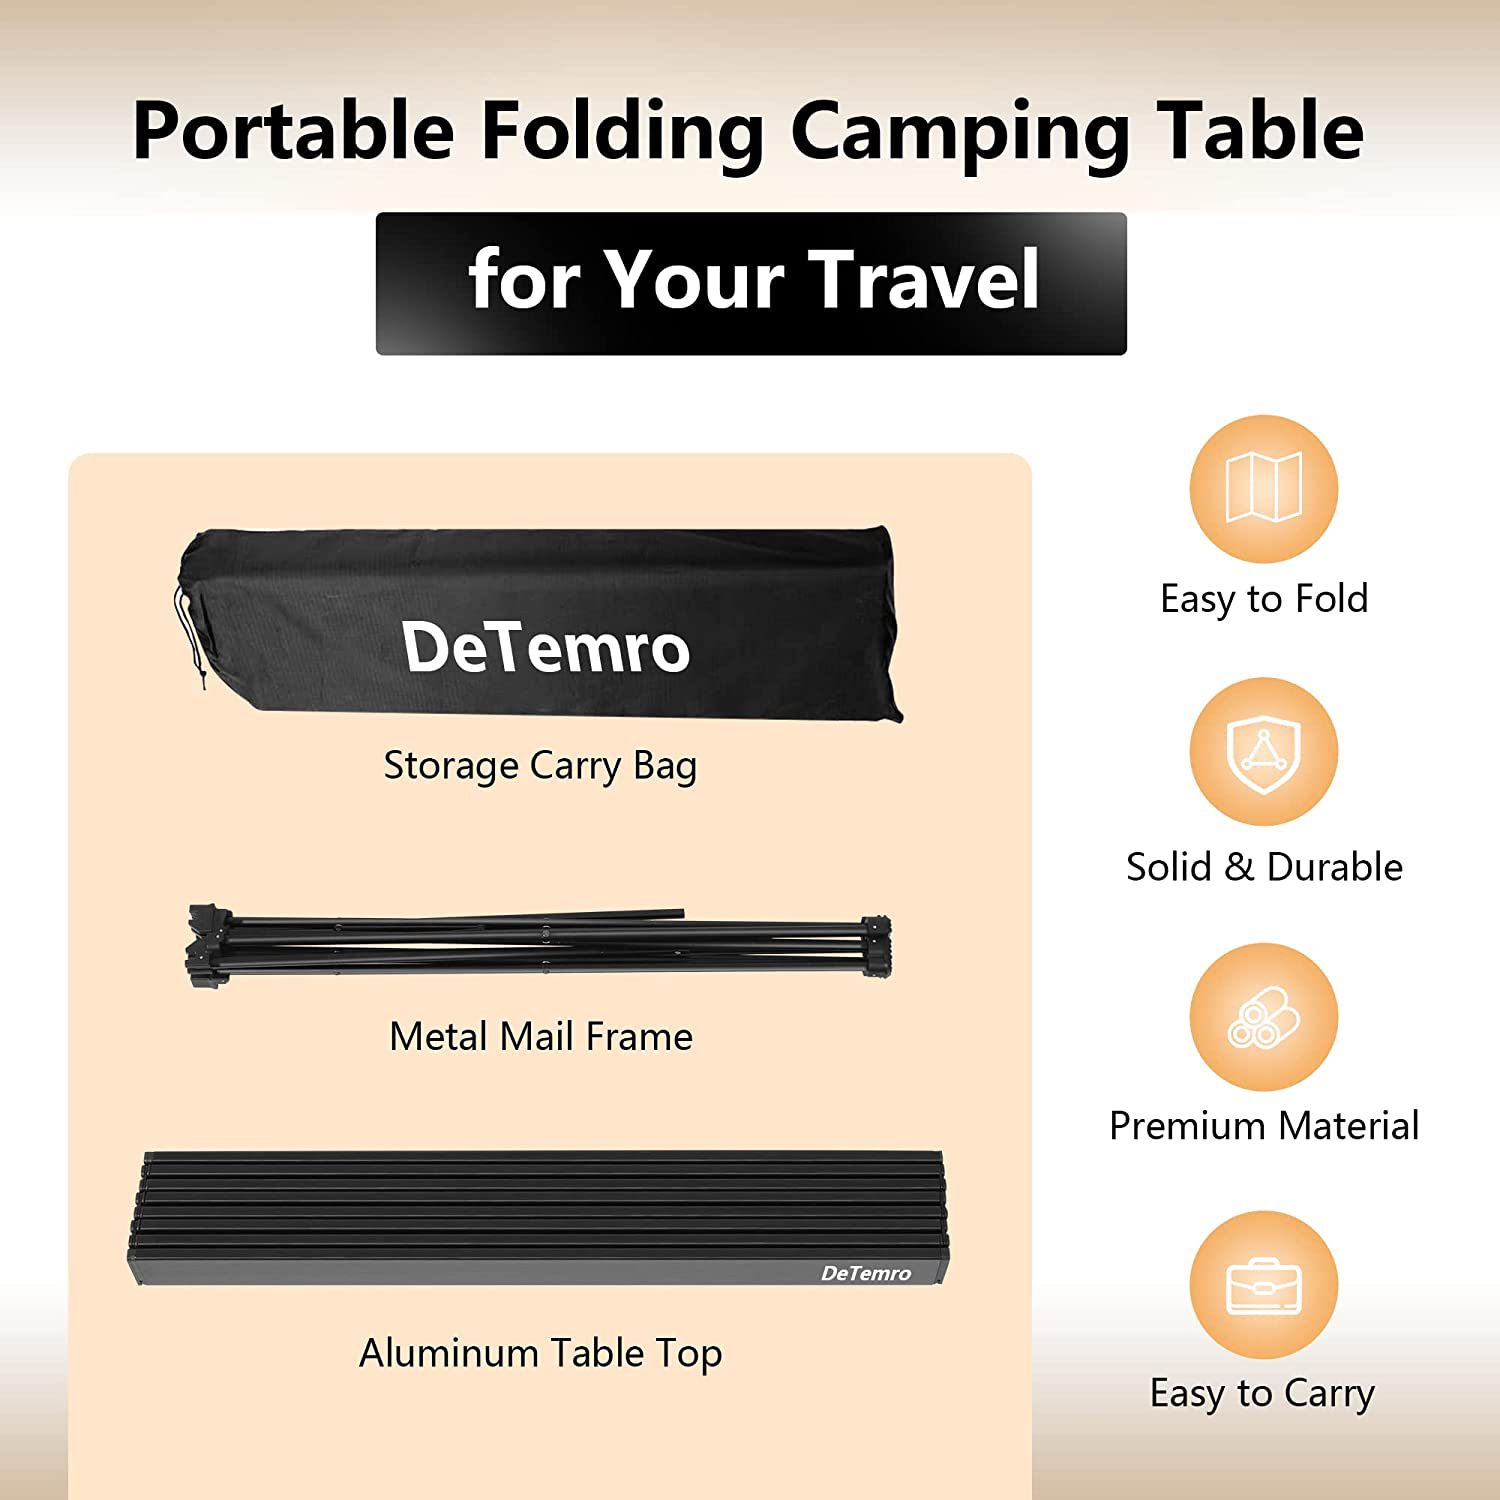 Folding Camping Table, Portable Camping Gear Aluminum Picnic Table with Carry Bag, Ultralight Foldable Camp Table Beach Table for Outdoor Cooking, Pic